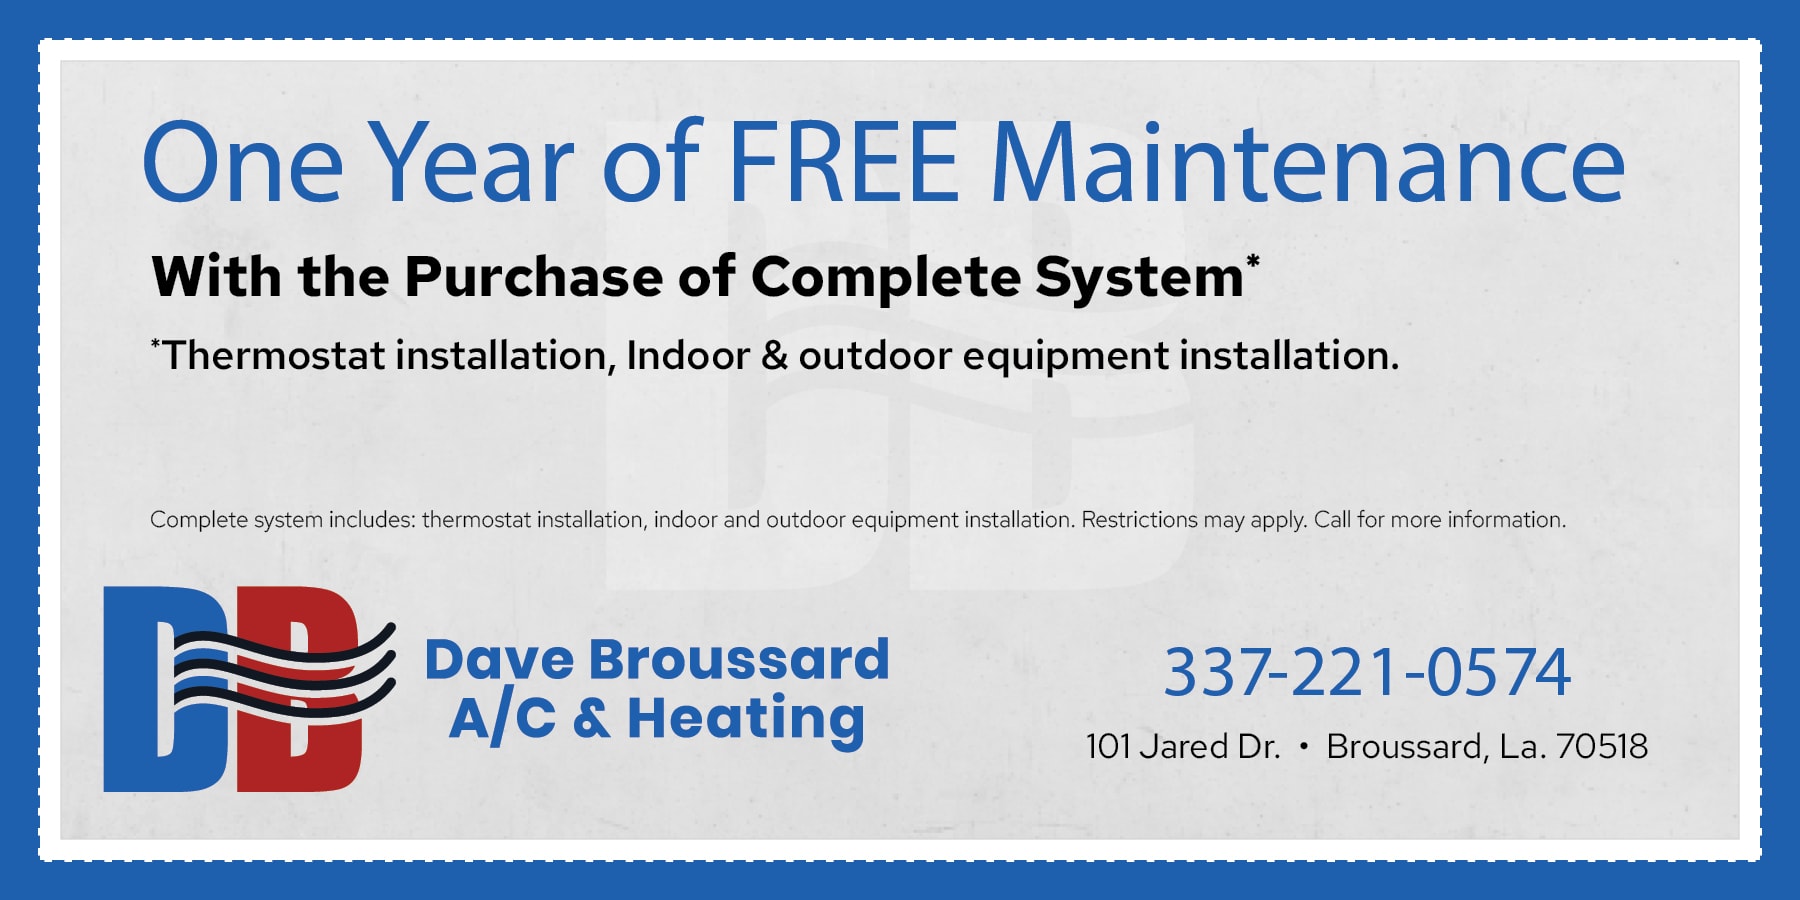 One year of free maintenance with the purchase of complete system special.